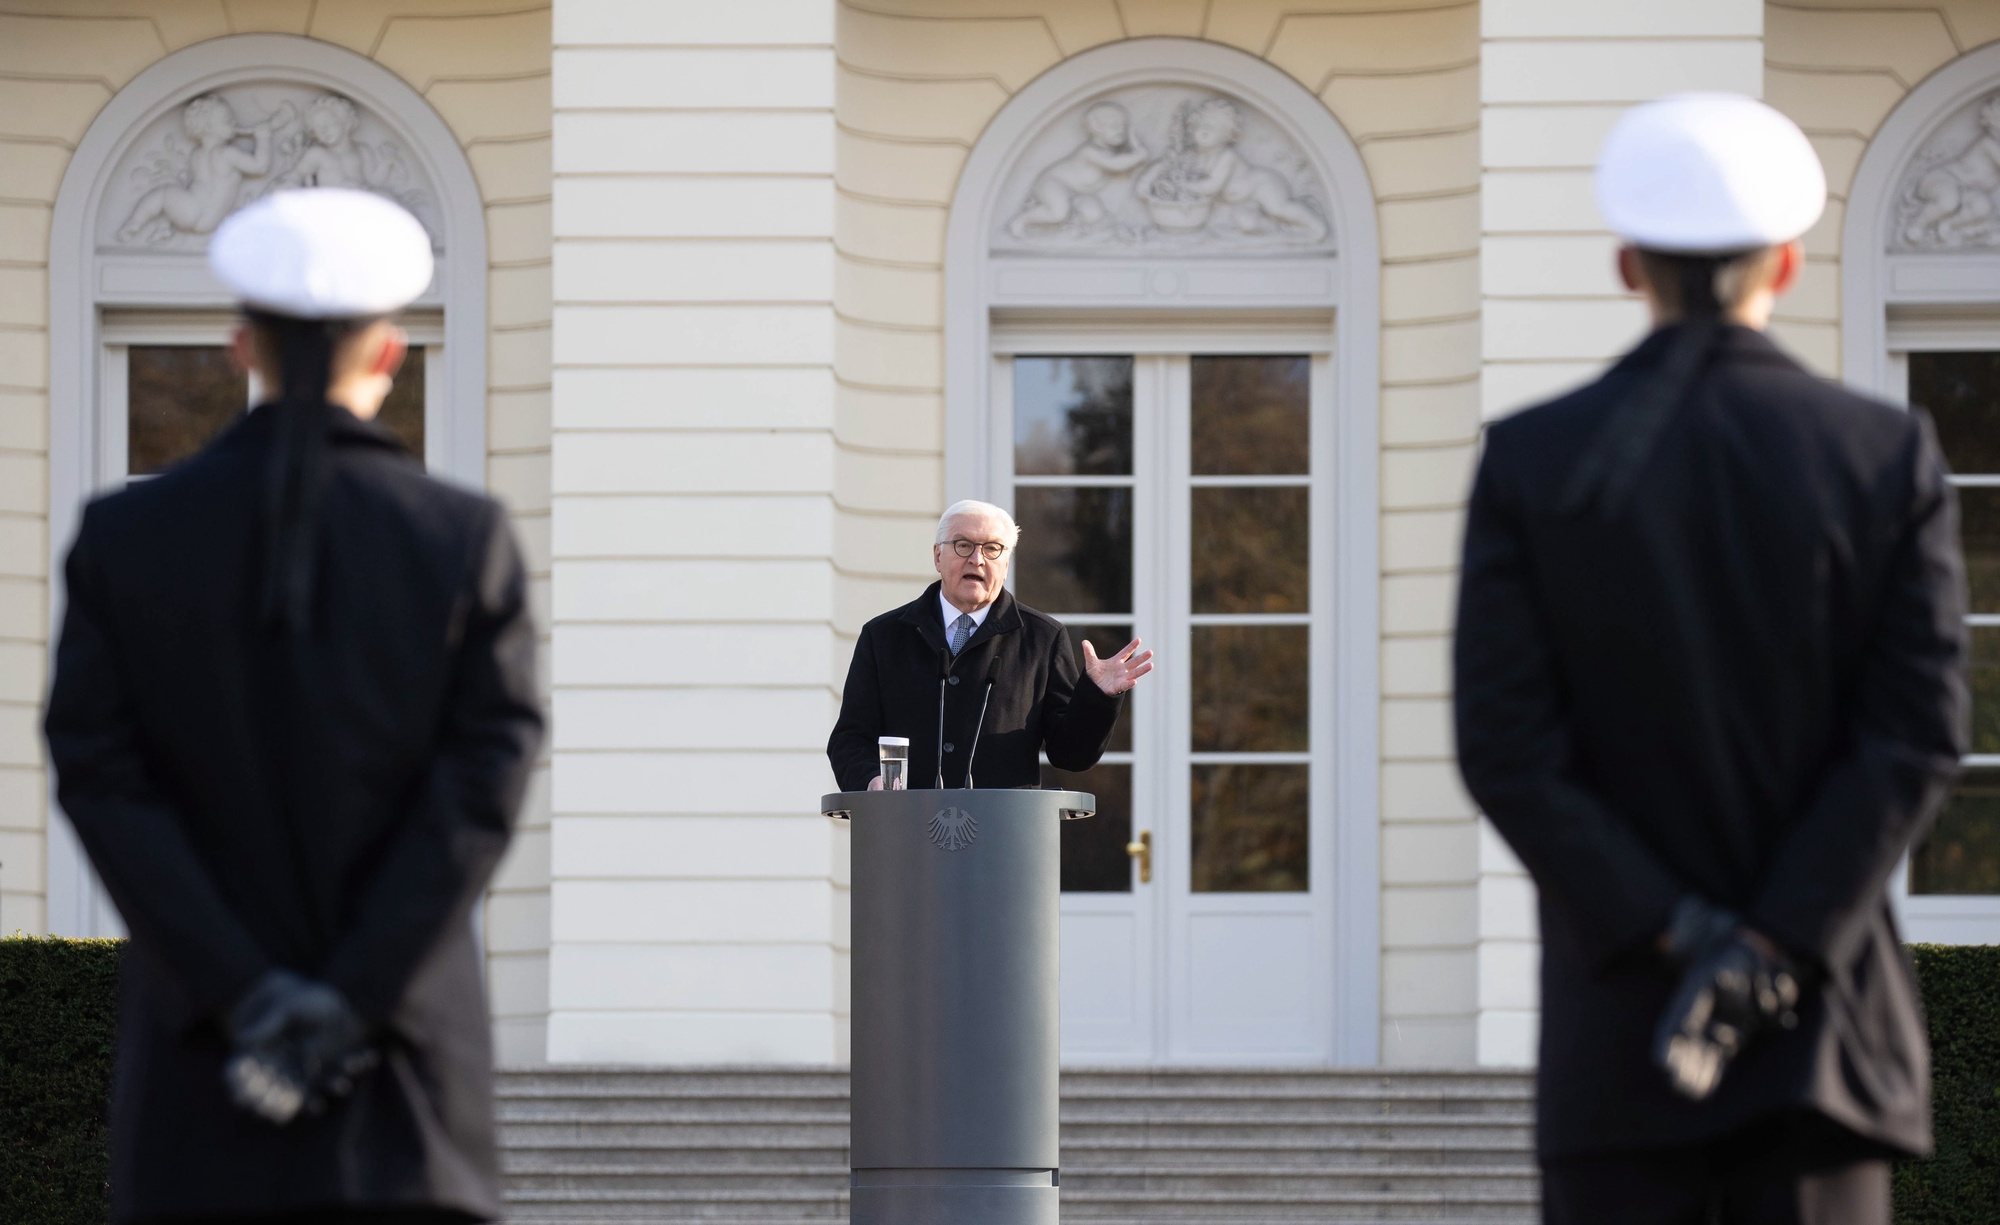 epa08815813 German President Frank-Walter Steinmeier delivers a speech during a swearing in ceremony of the German armed forces (Bundeswehr) soldiers in Berlin, Germany, 12 November 2020. The ceremony takes place on the 65th anniversary of the founding of the German army.  EPA/HAYOUNG JEON